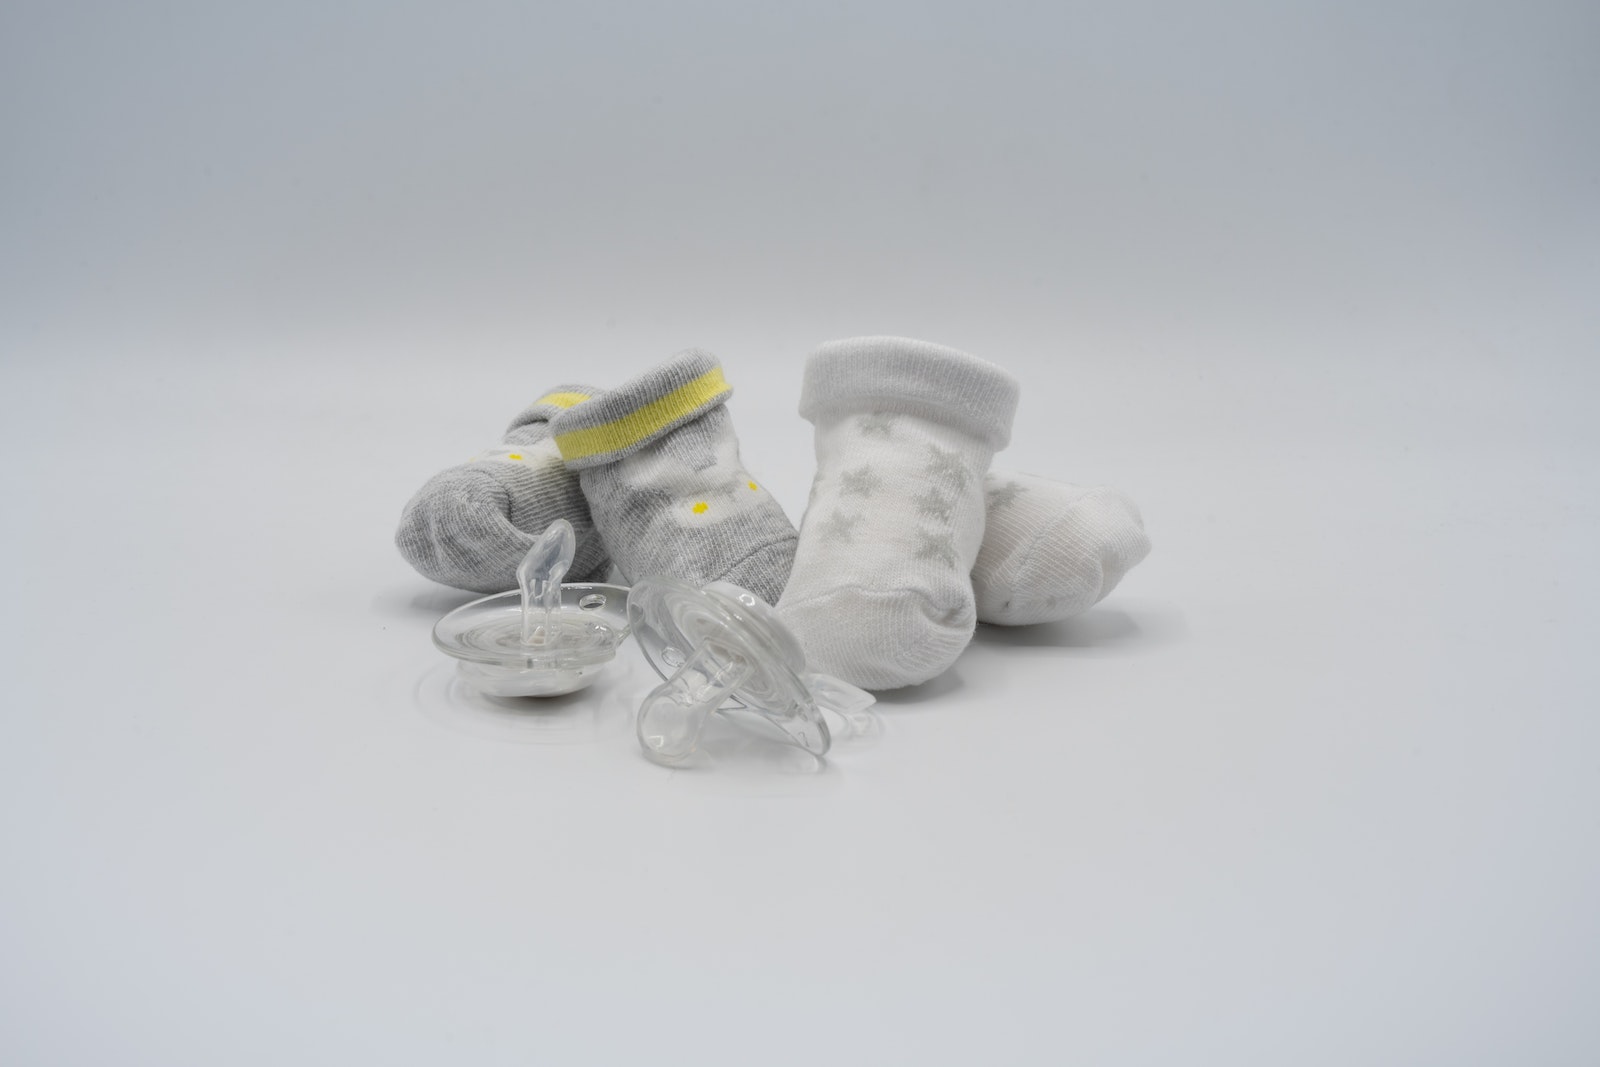 Socks and Pacifiers on White Surface